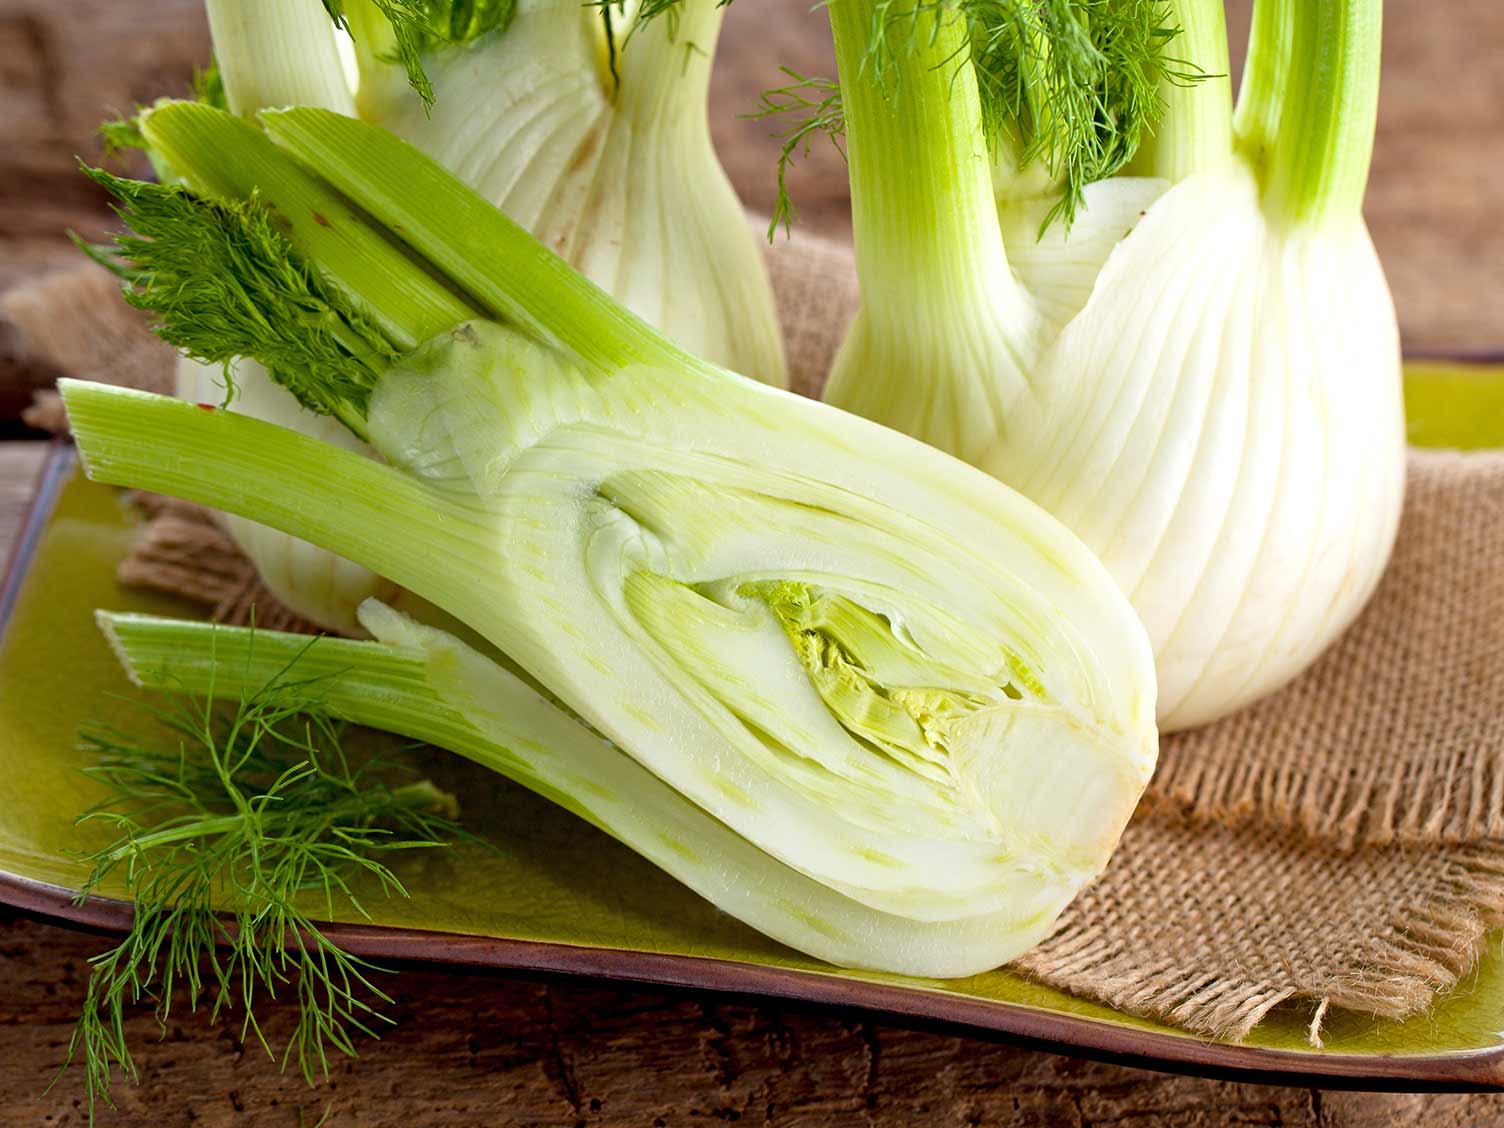 Fresh Florence fennel ready for cooking